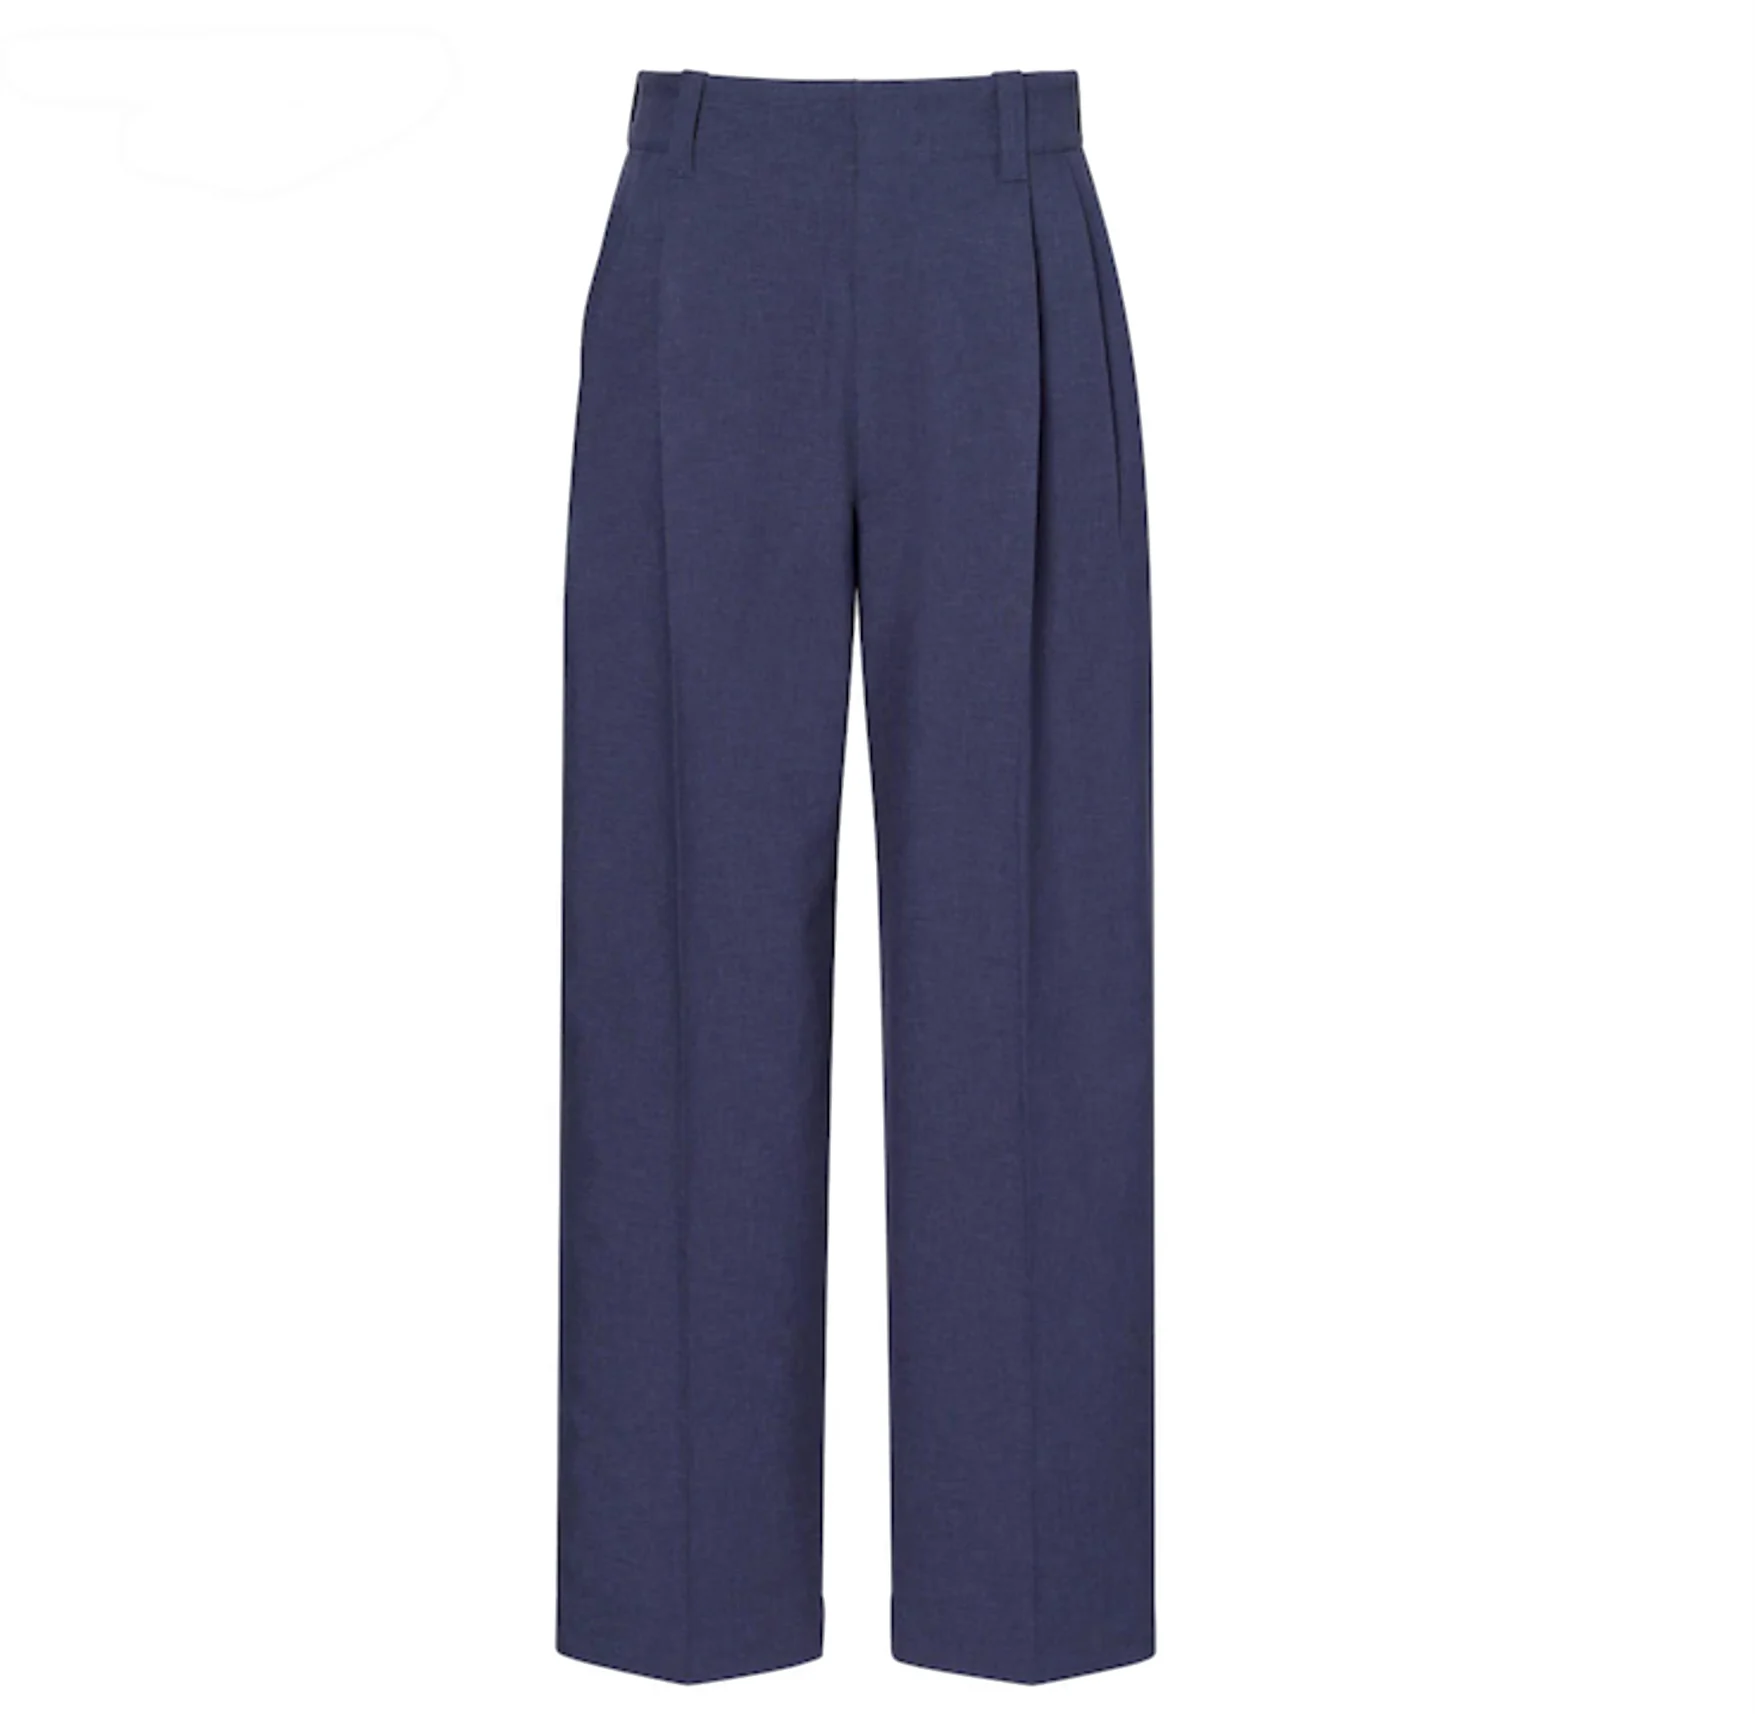 Uniqlo x MARNI Wide Fit Tuck Pants (Asia Sizing) Blue Men's - SS22 - GB